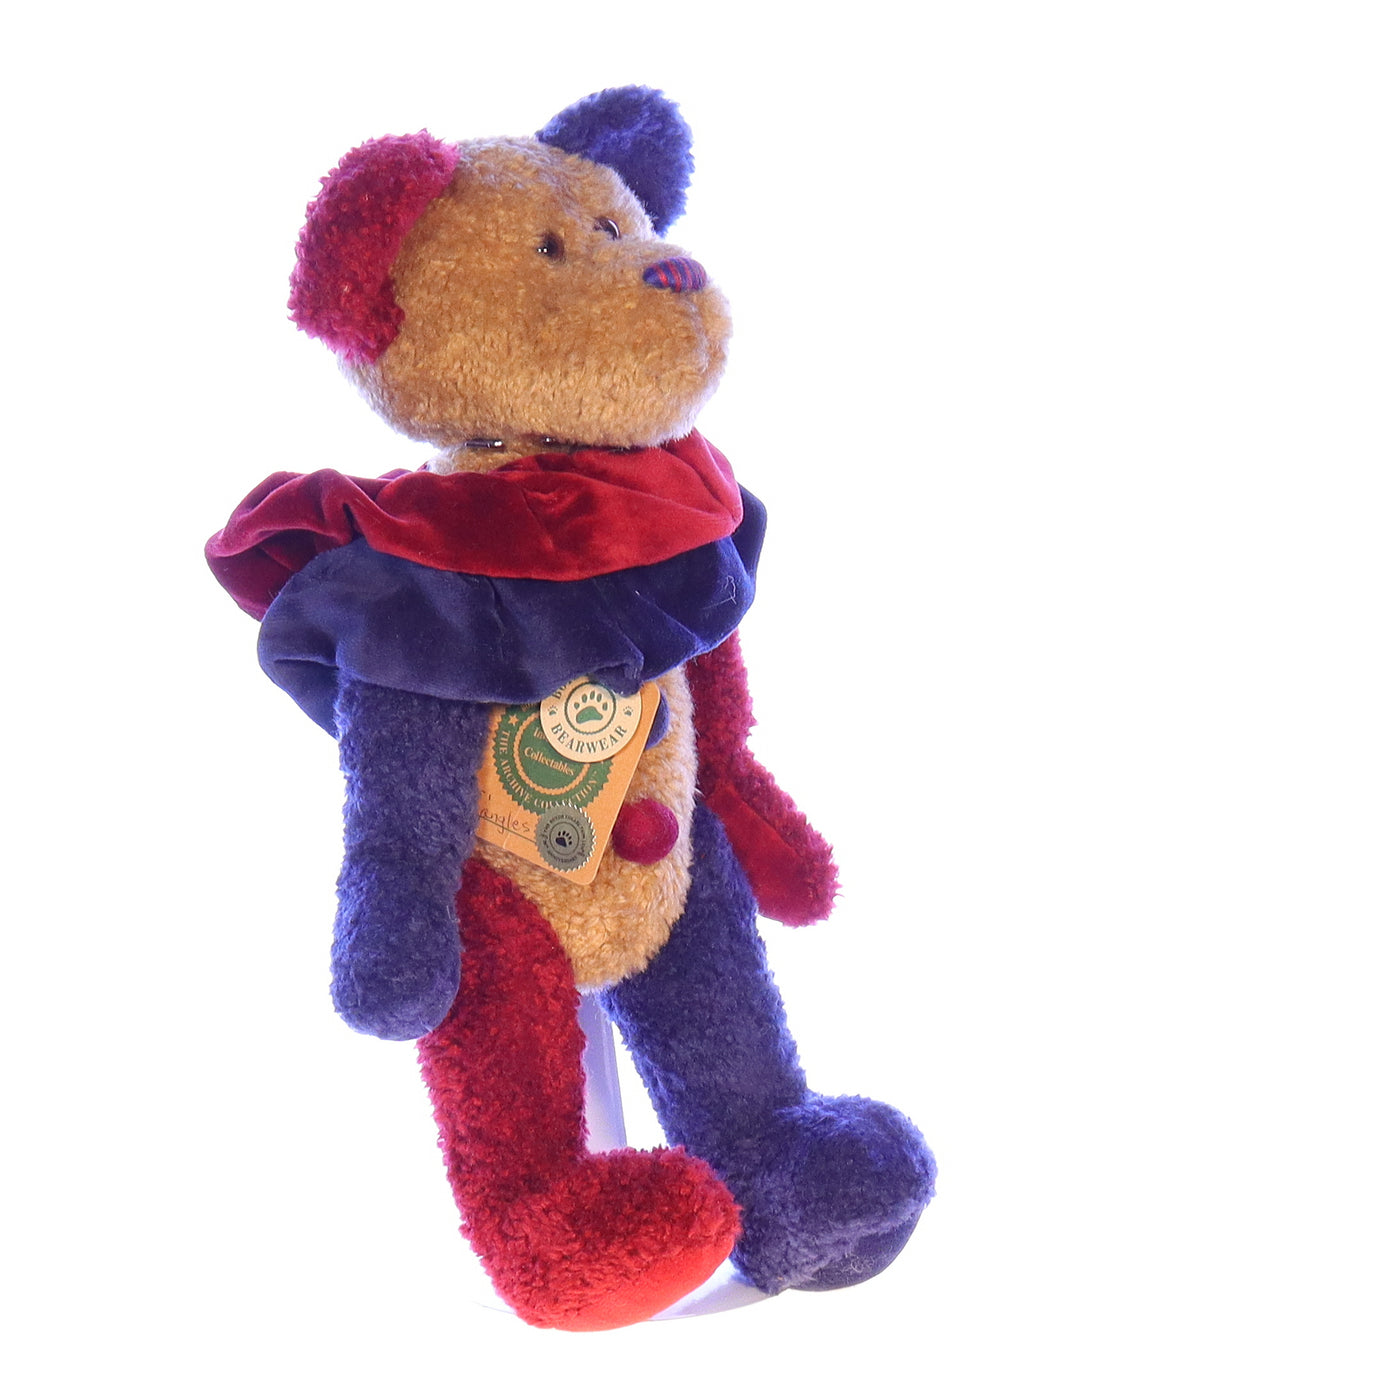 Boyds Bears Collection Plush with Tags The Archive Collection Mr. Bojangles 1990